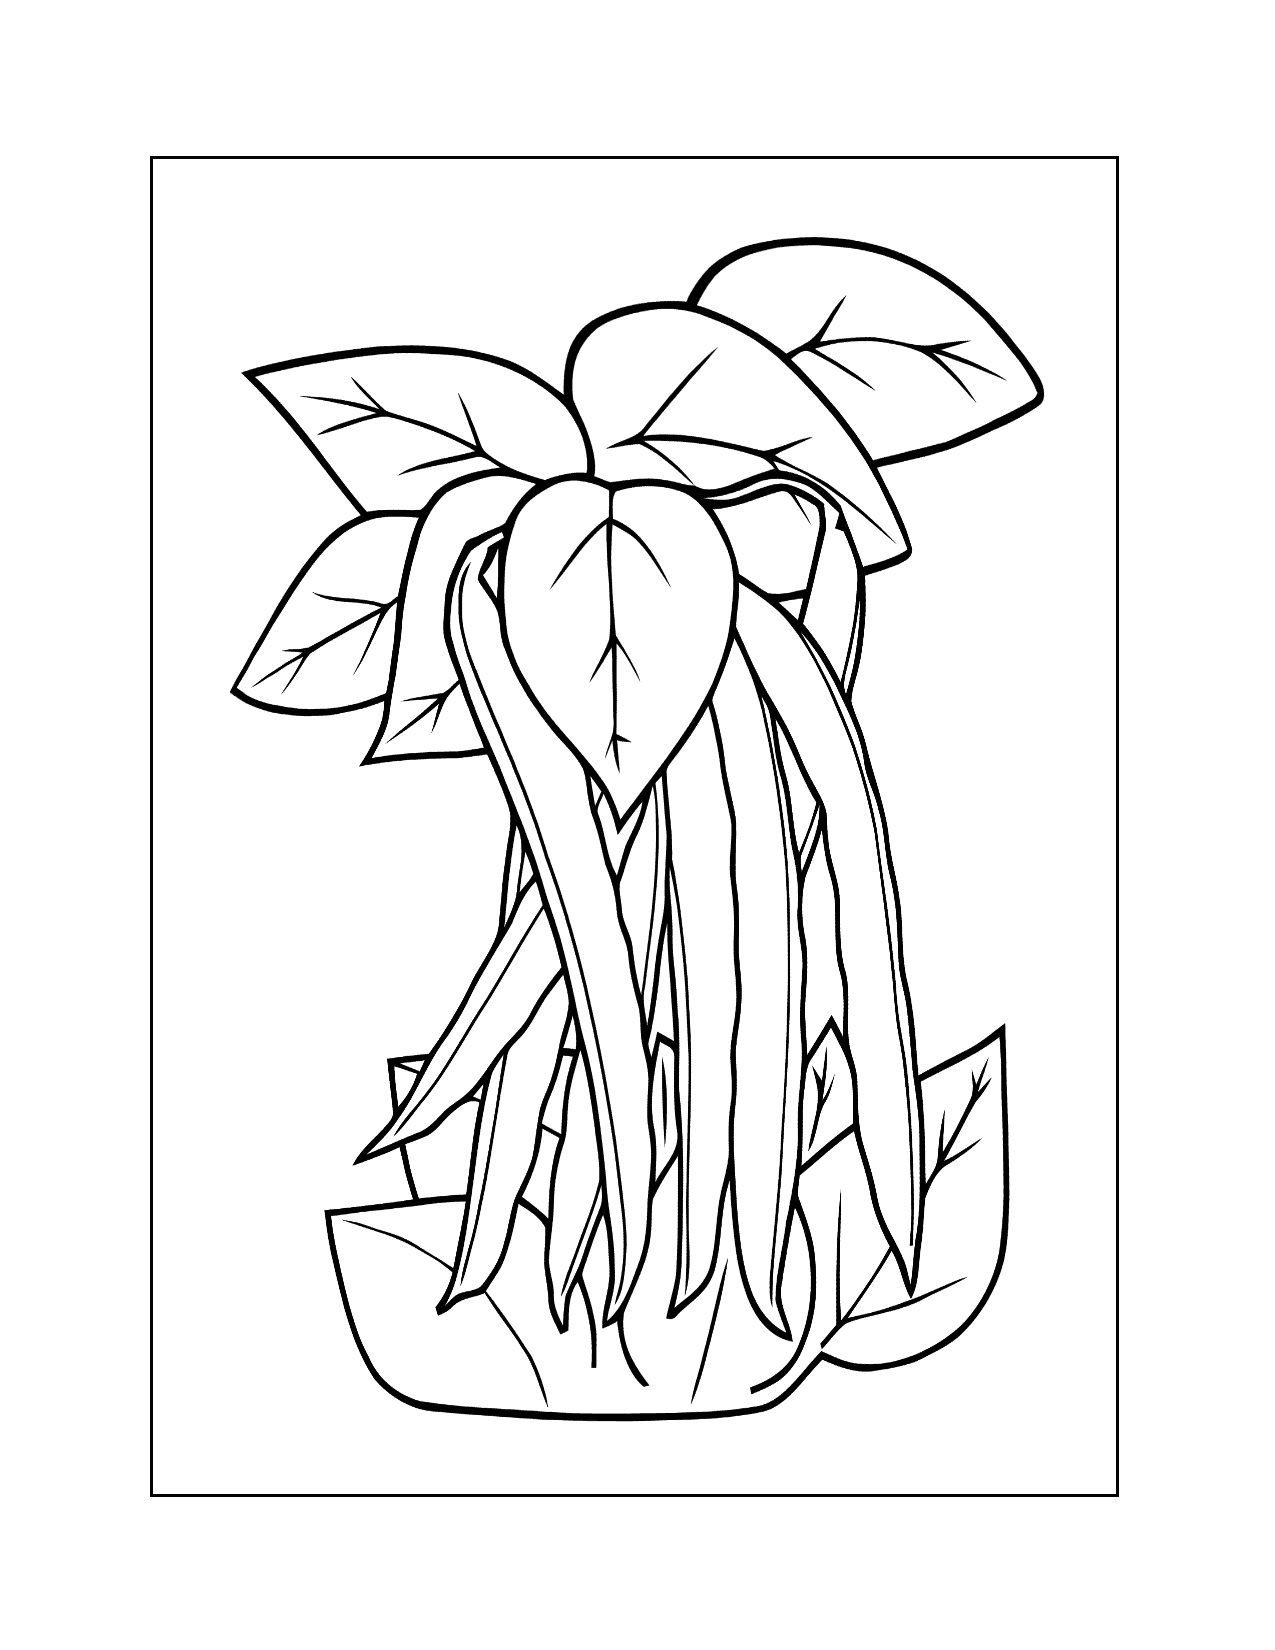 Pea Plant Coloring Page